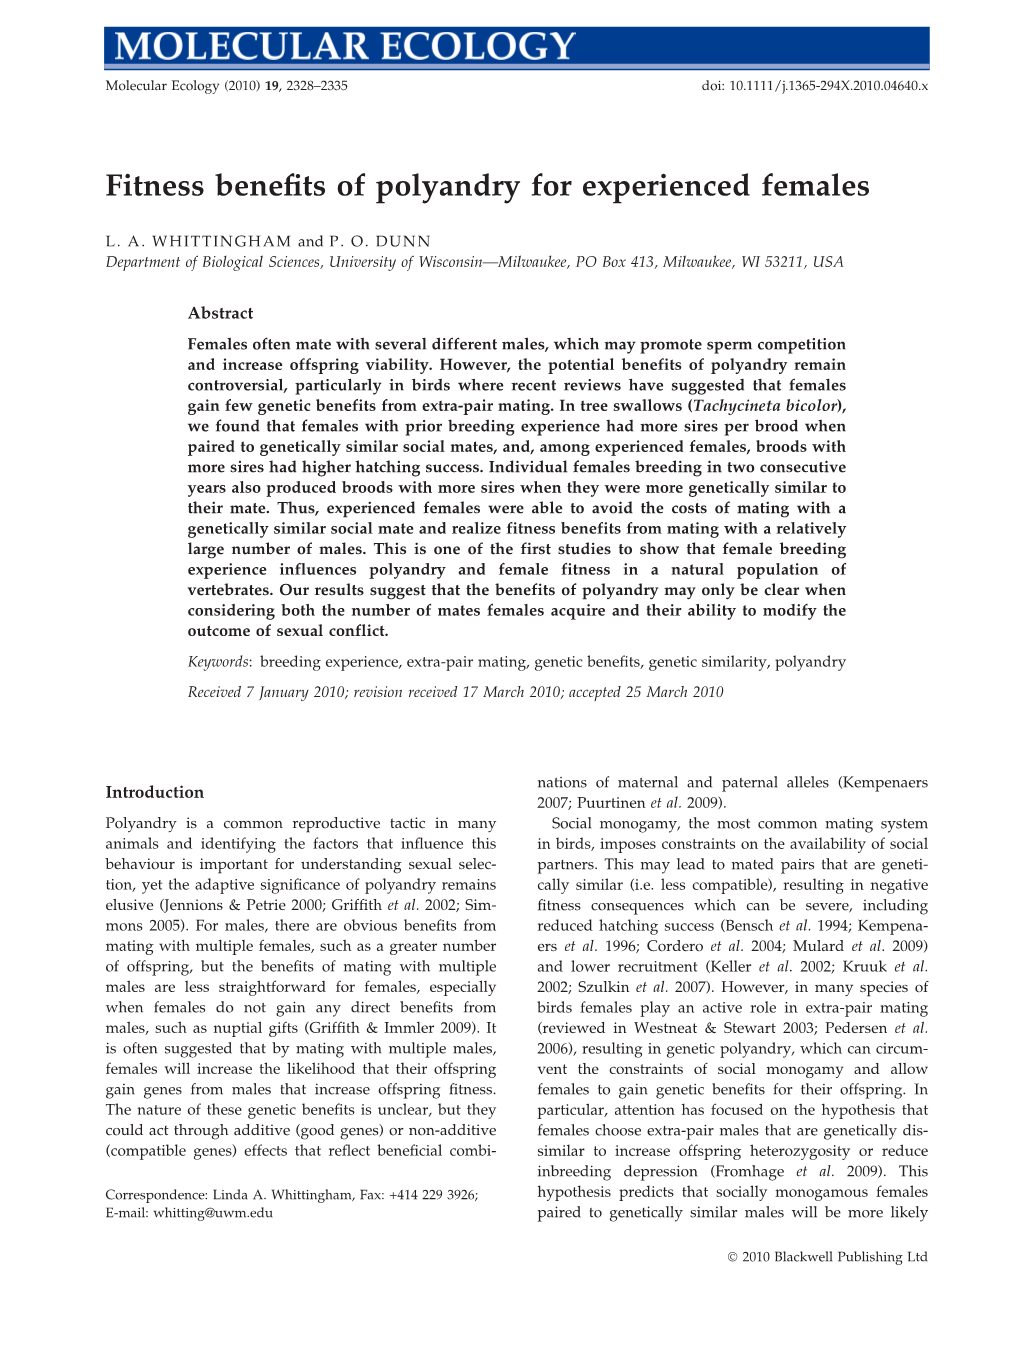 Fitness Benefits of Polyandry for Experienced Females